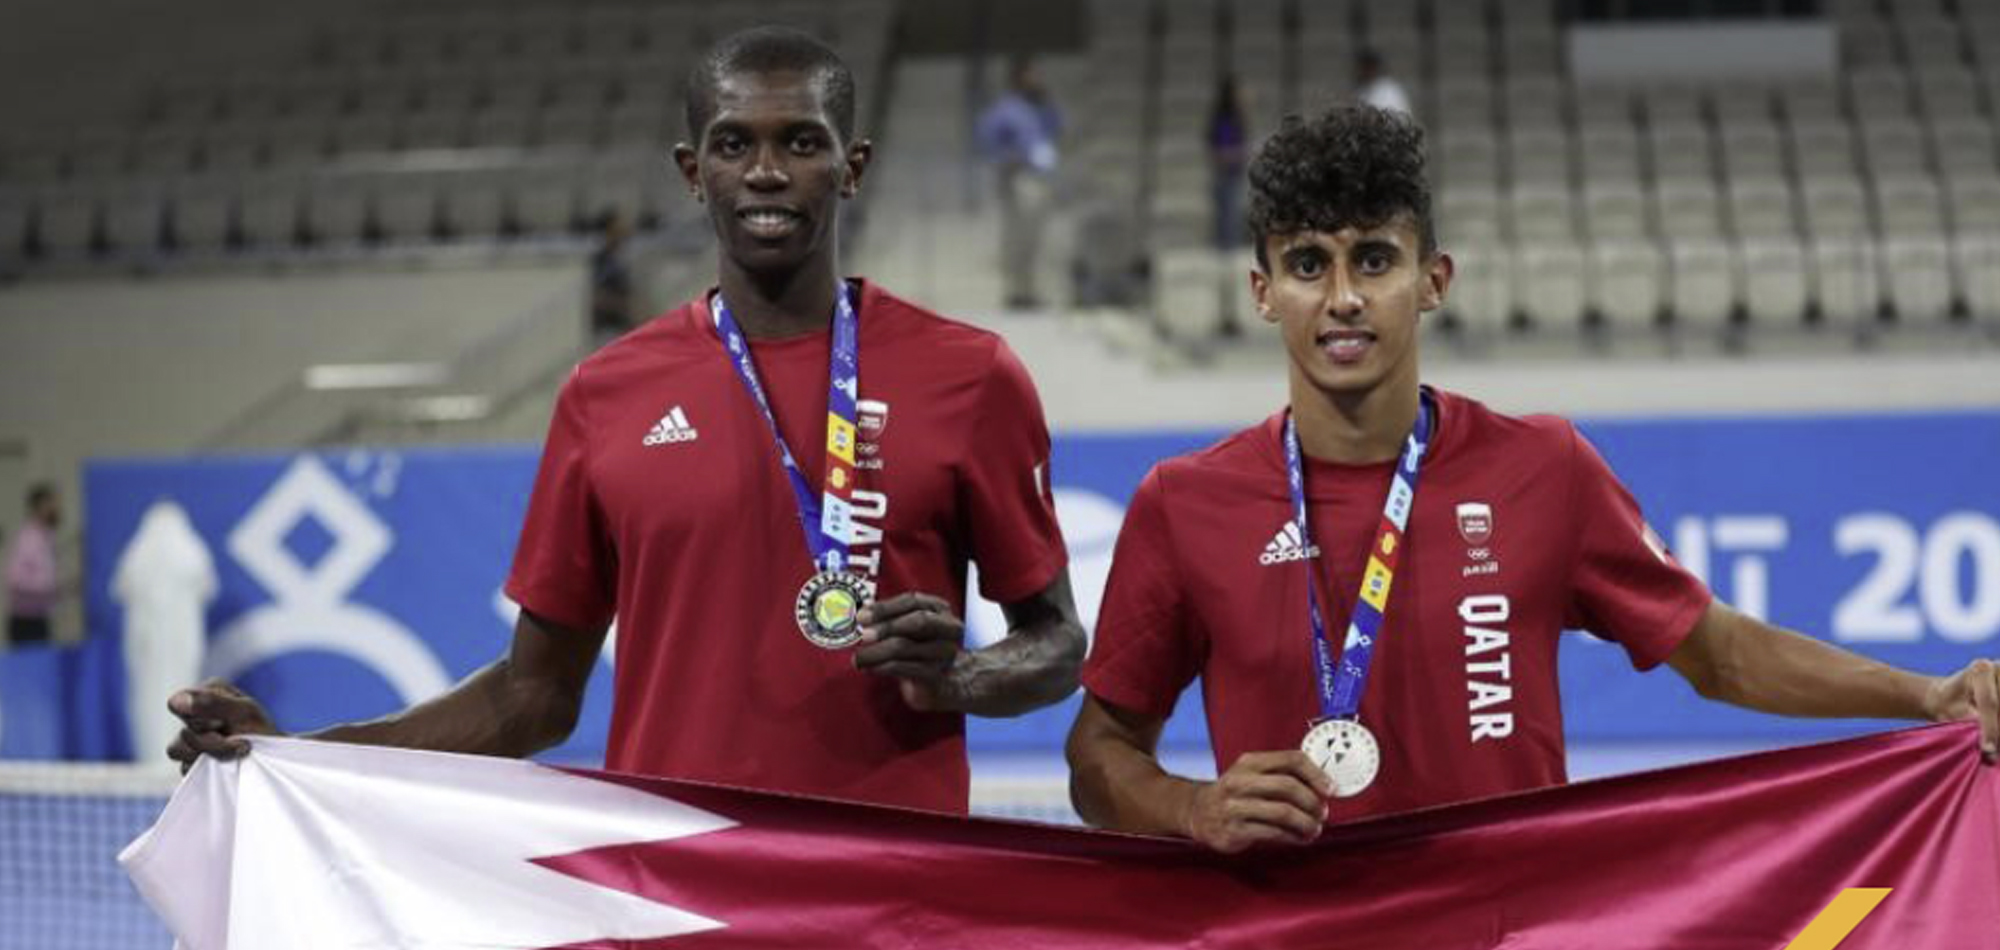 Nawaf and Shannan win doubles silver medal